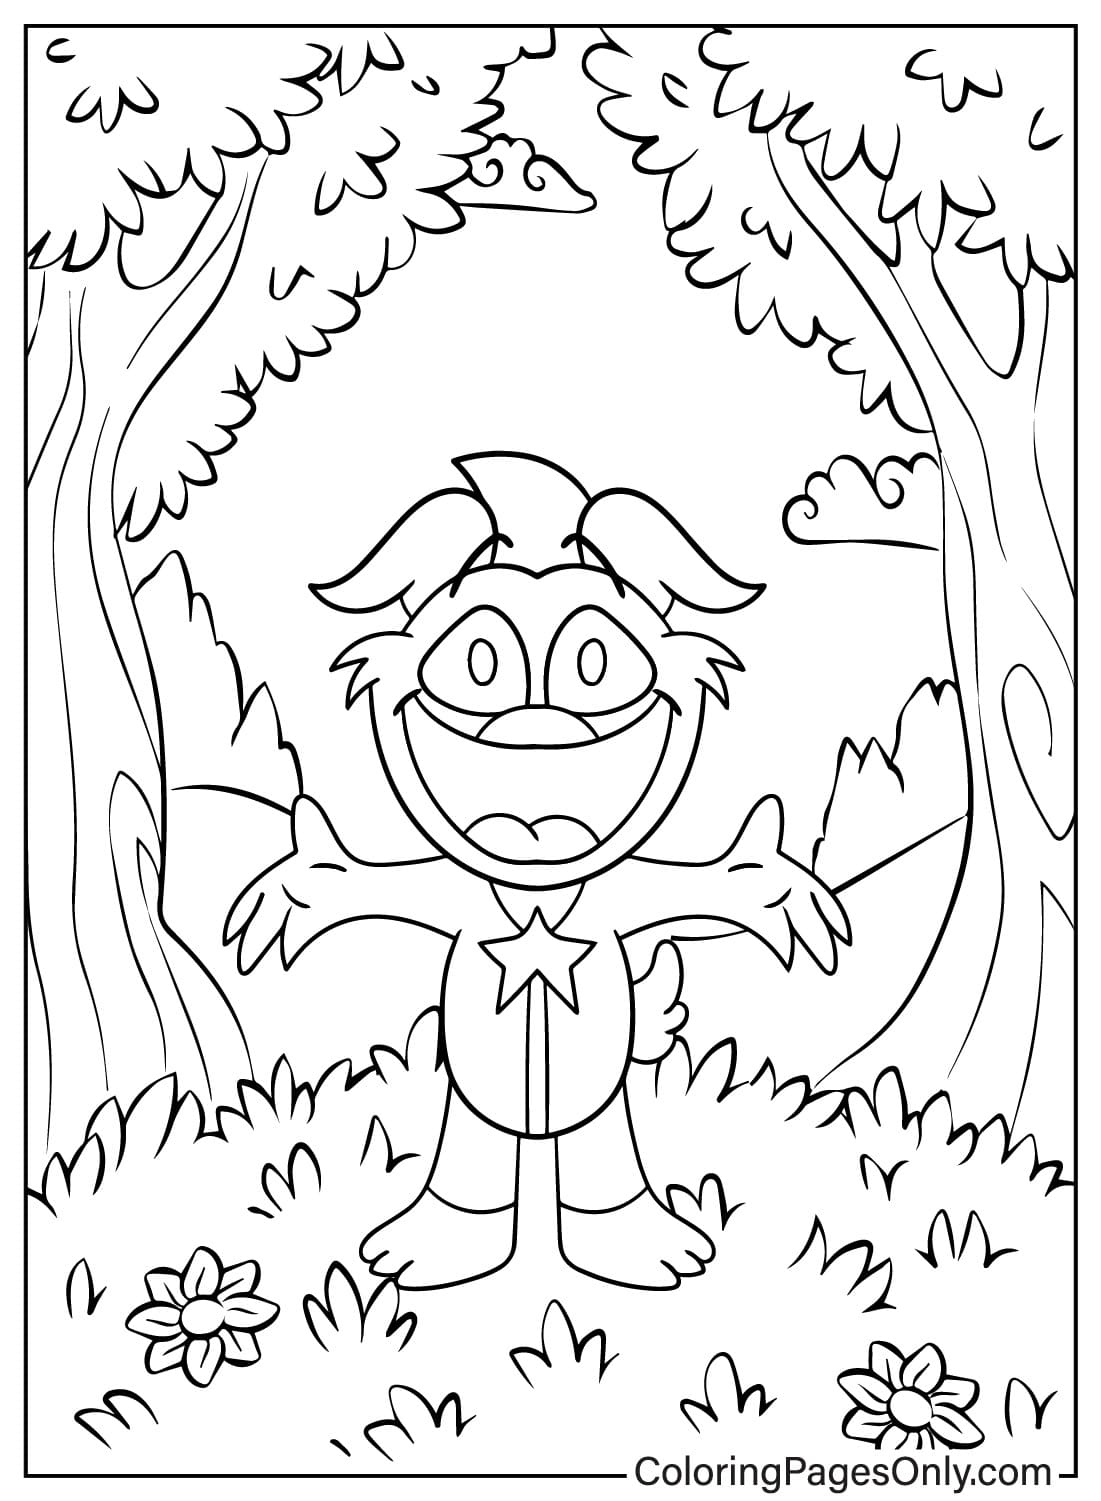 Images KickinChicken Coloring Page from KickinChicken